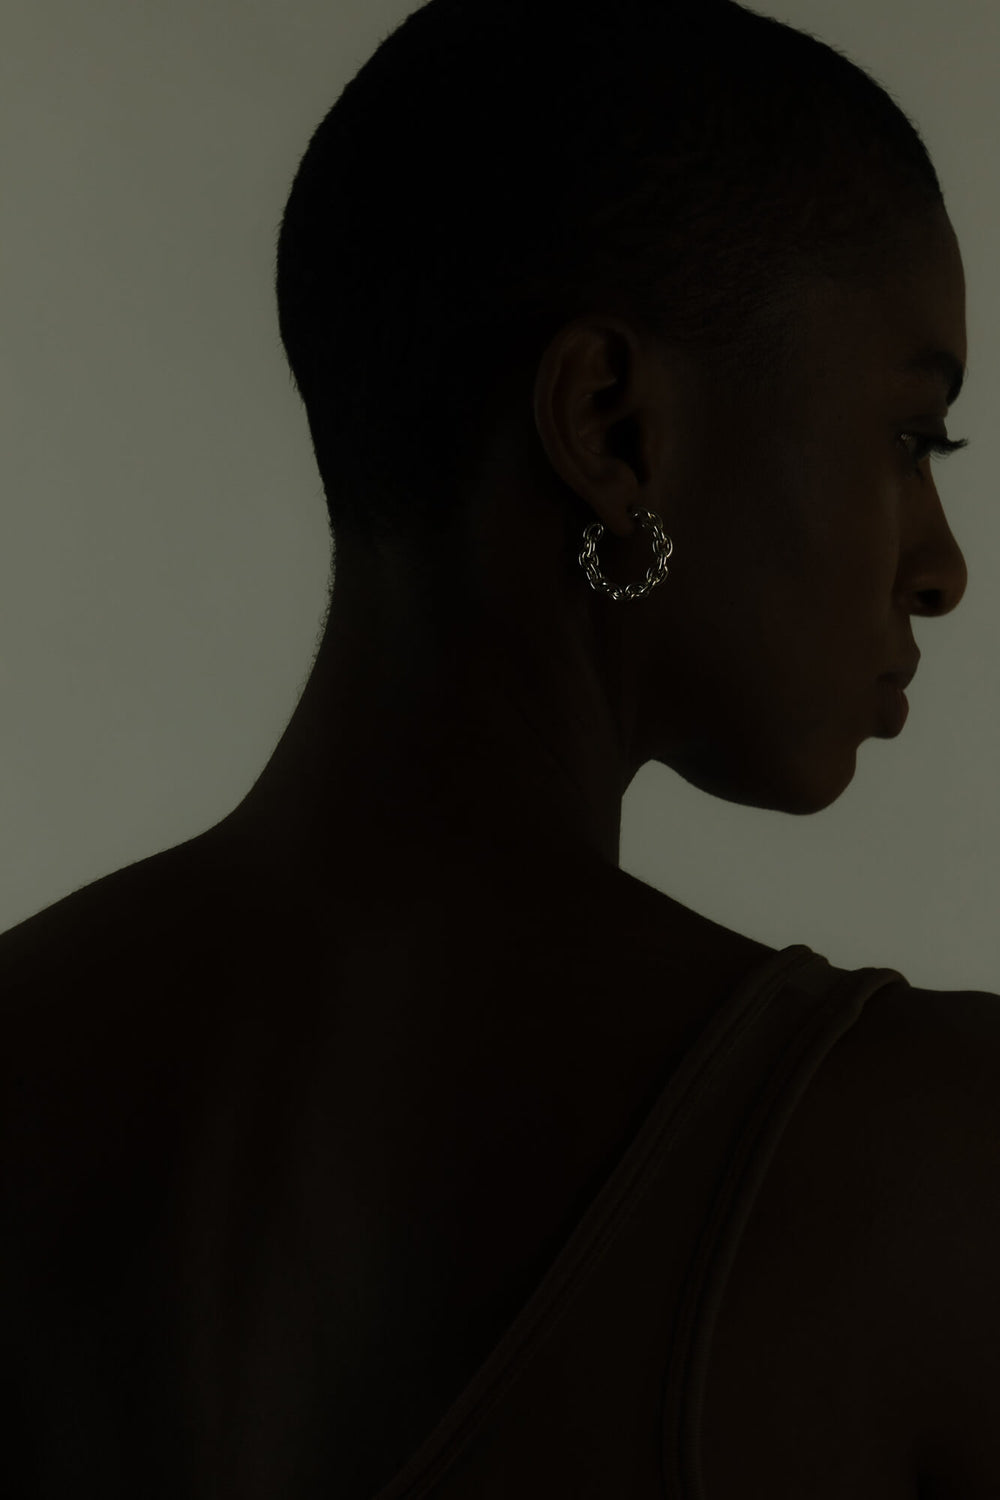 Link chain earring with a high gloss finish. Fine jewelry handmade in Berlin.